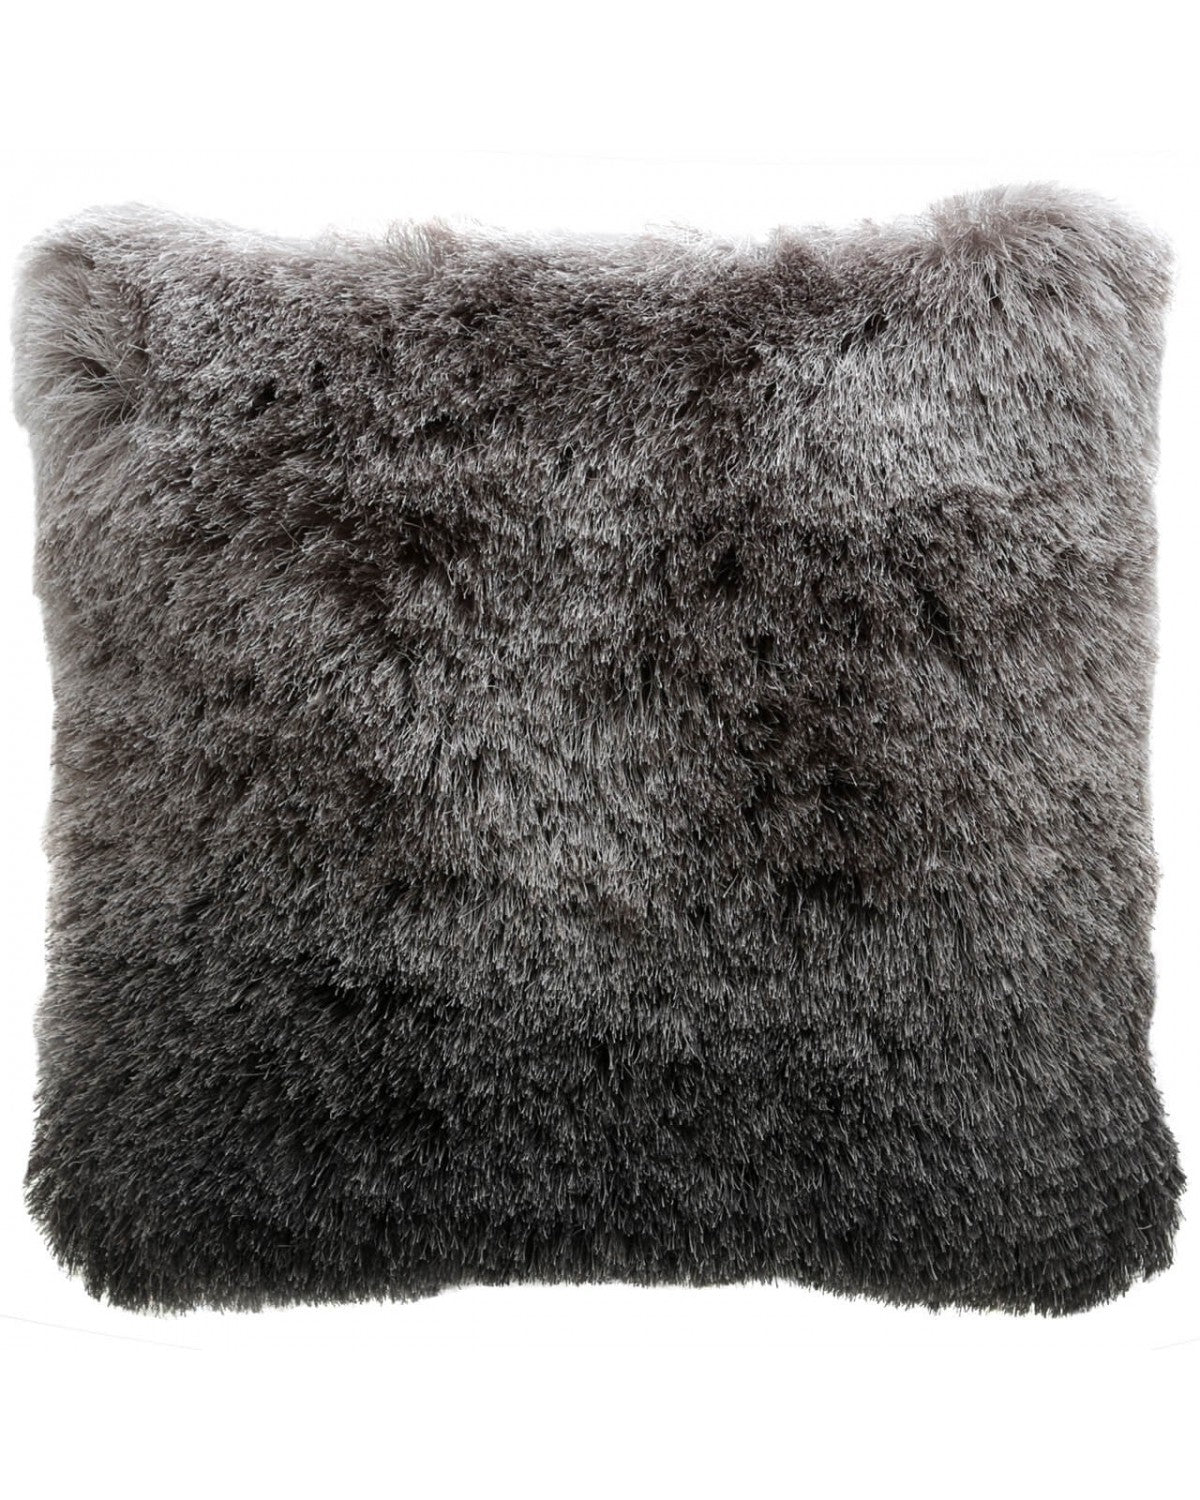 Deco Home 45x45 Fluffy Ombre Cushion Cover Charcoal Silver Silver